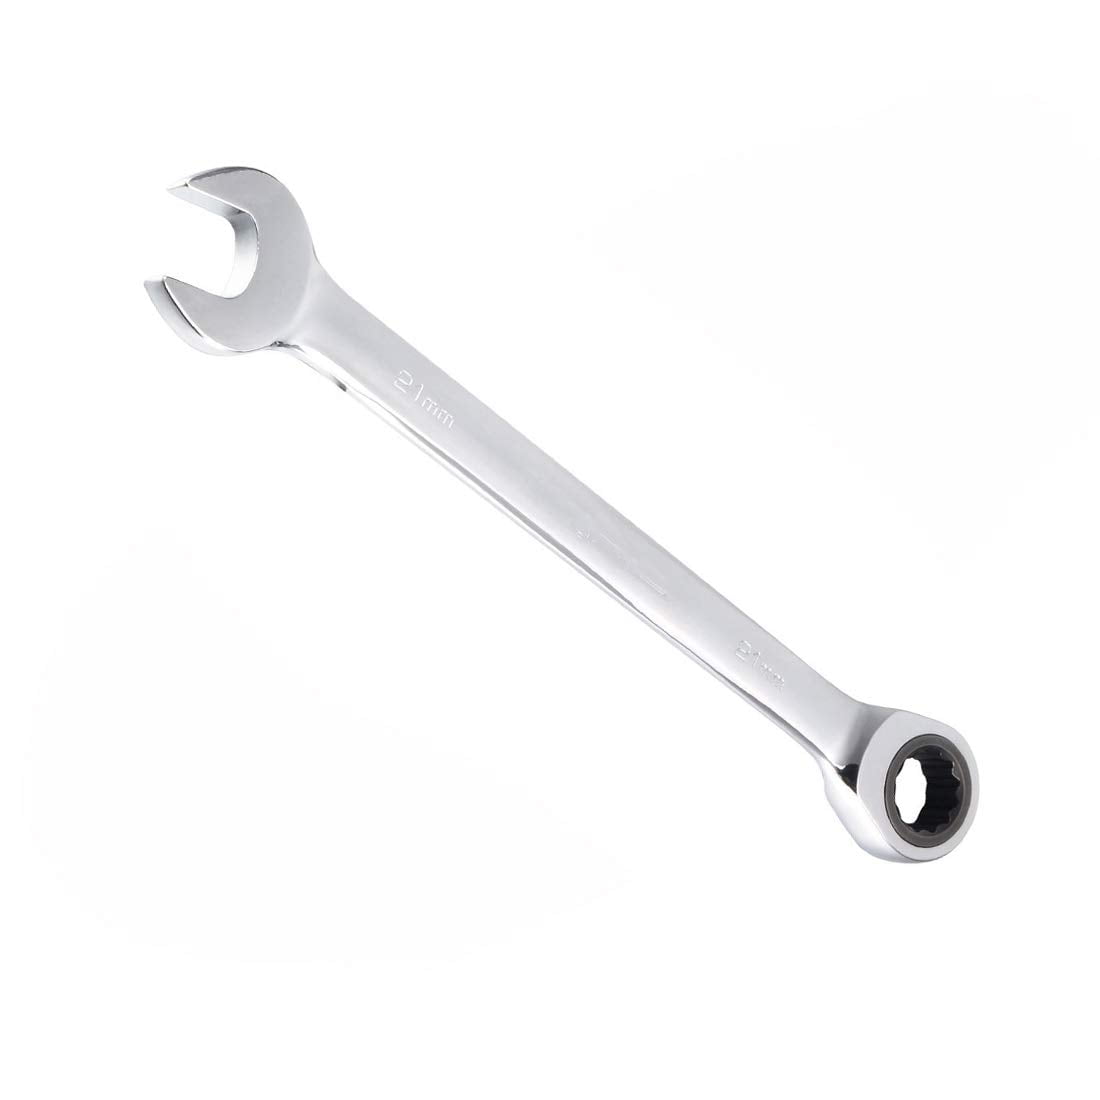 14mm Round Head Screw Single Open Ended Spanner Hand Tool 4.6" 